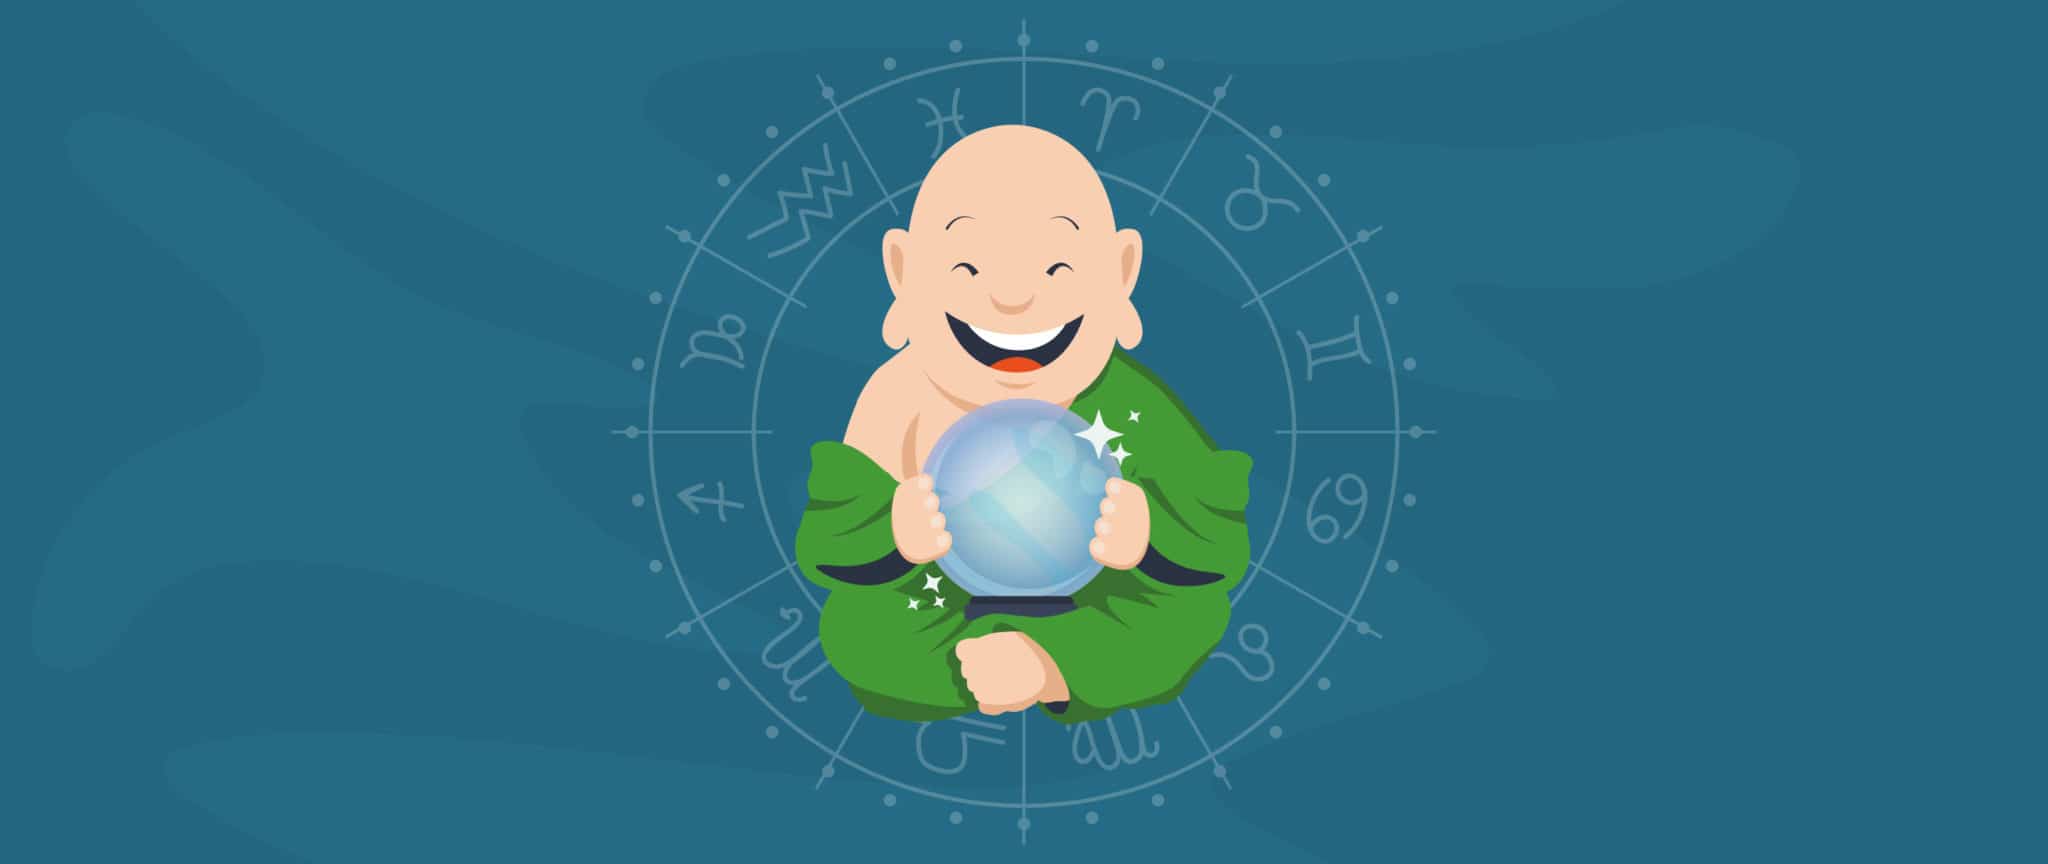 A smiling monk cartoon holds a crystal ball.